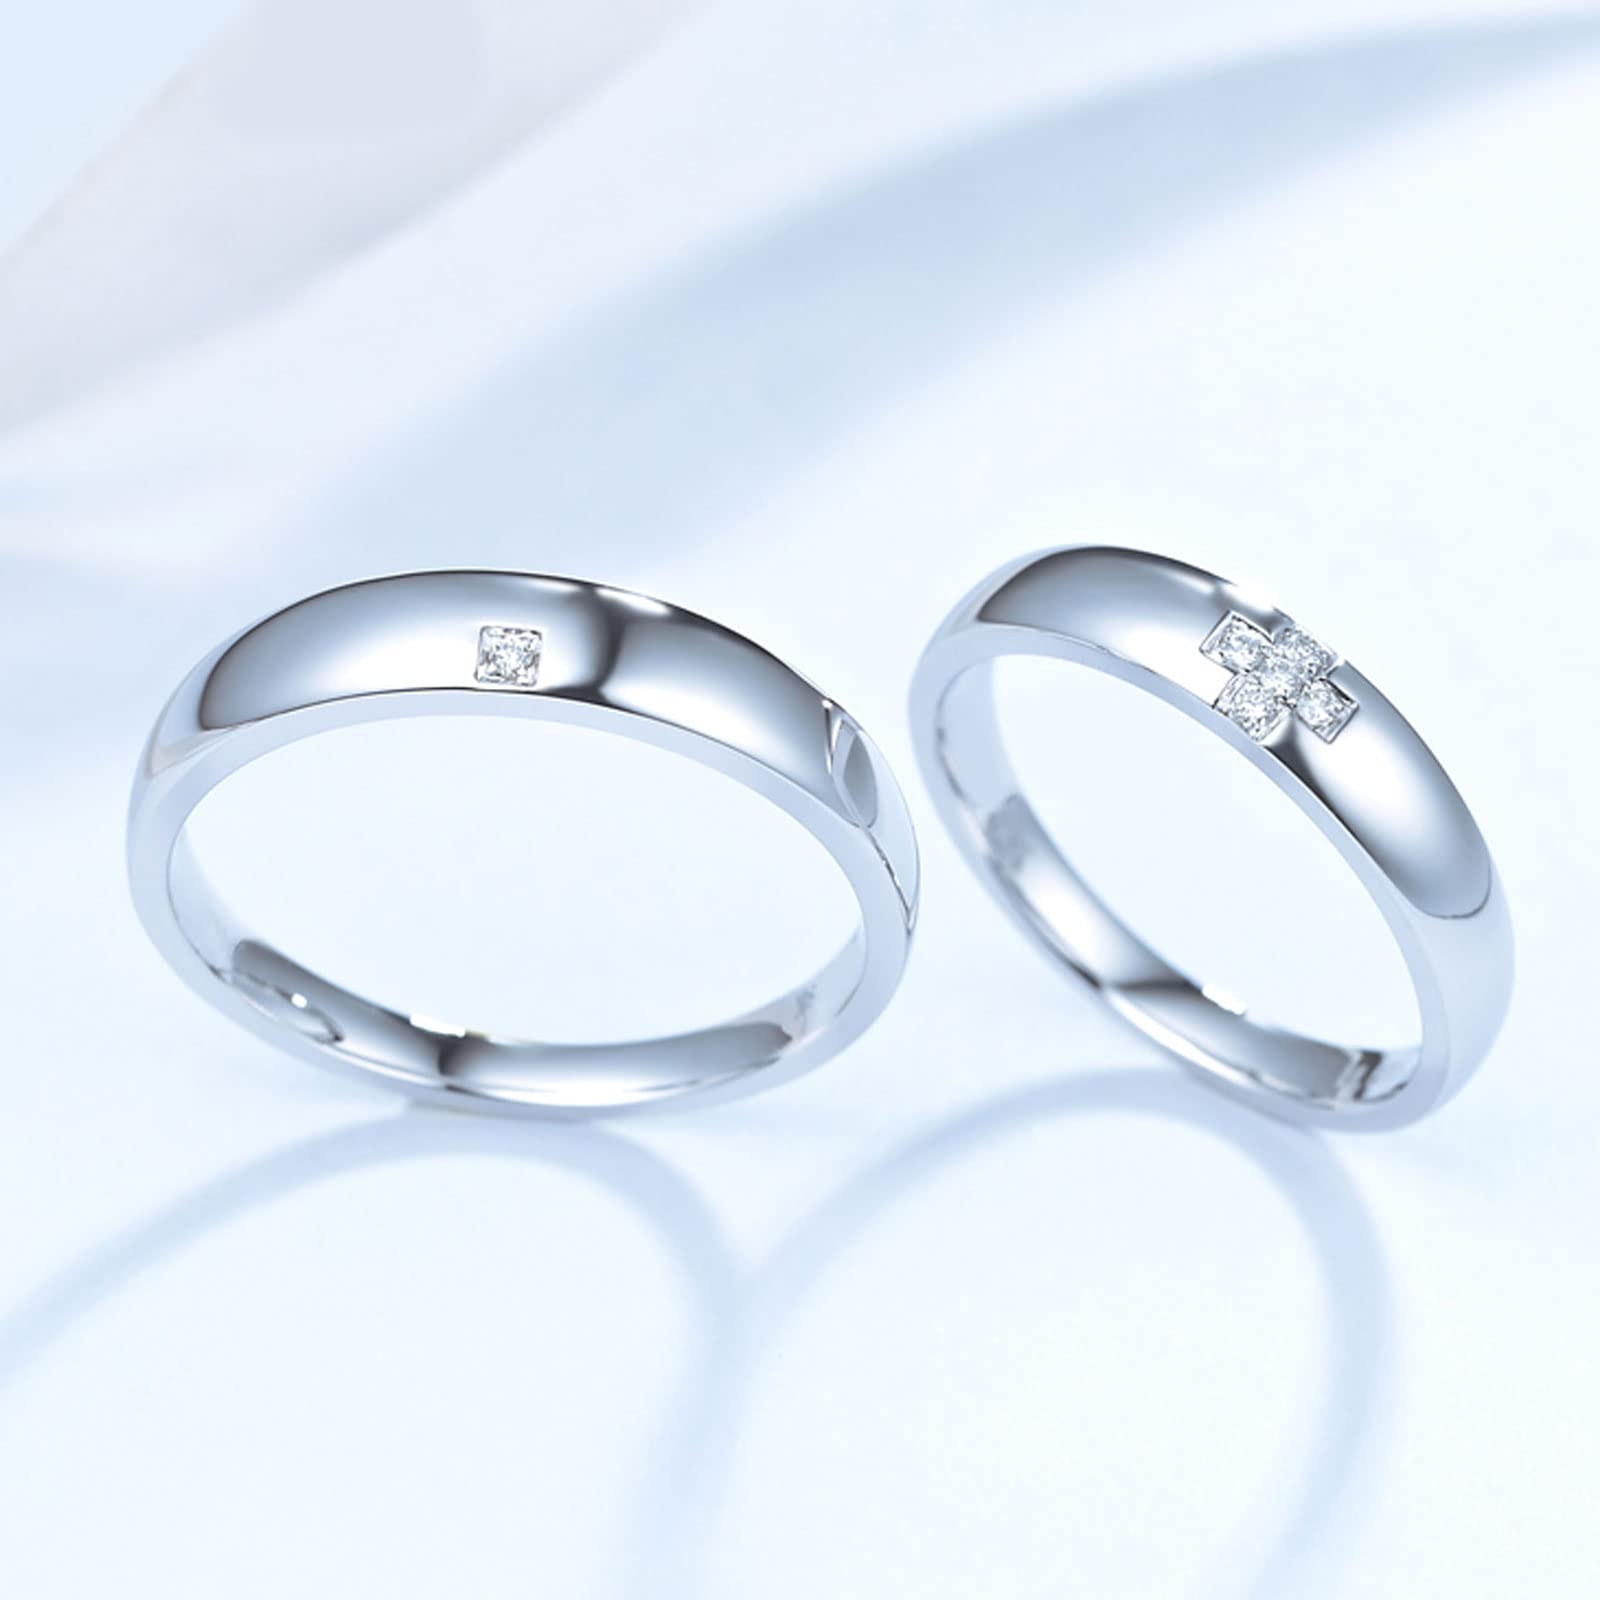 WSX Tiny Diamond Silver Or Solid 10K/14K/18K White Gold Couple Rings, Matching Rings for Him and Her Set Wedding Bands Promise Engagement Ring, Available in Size 3-15.5